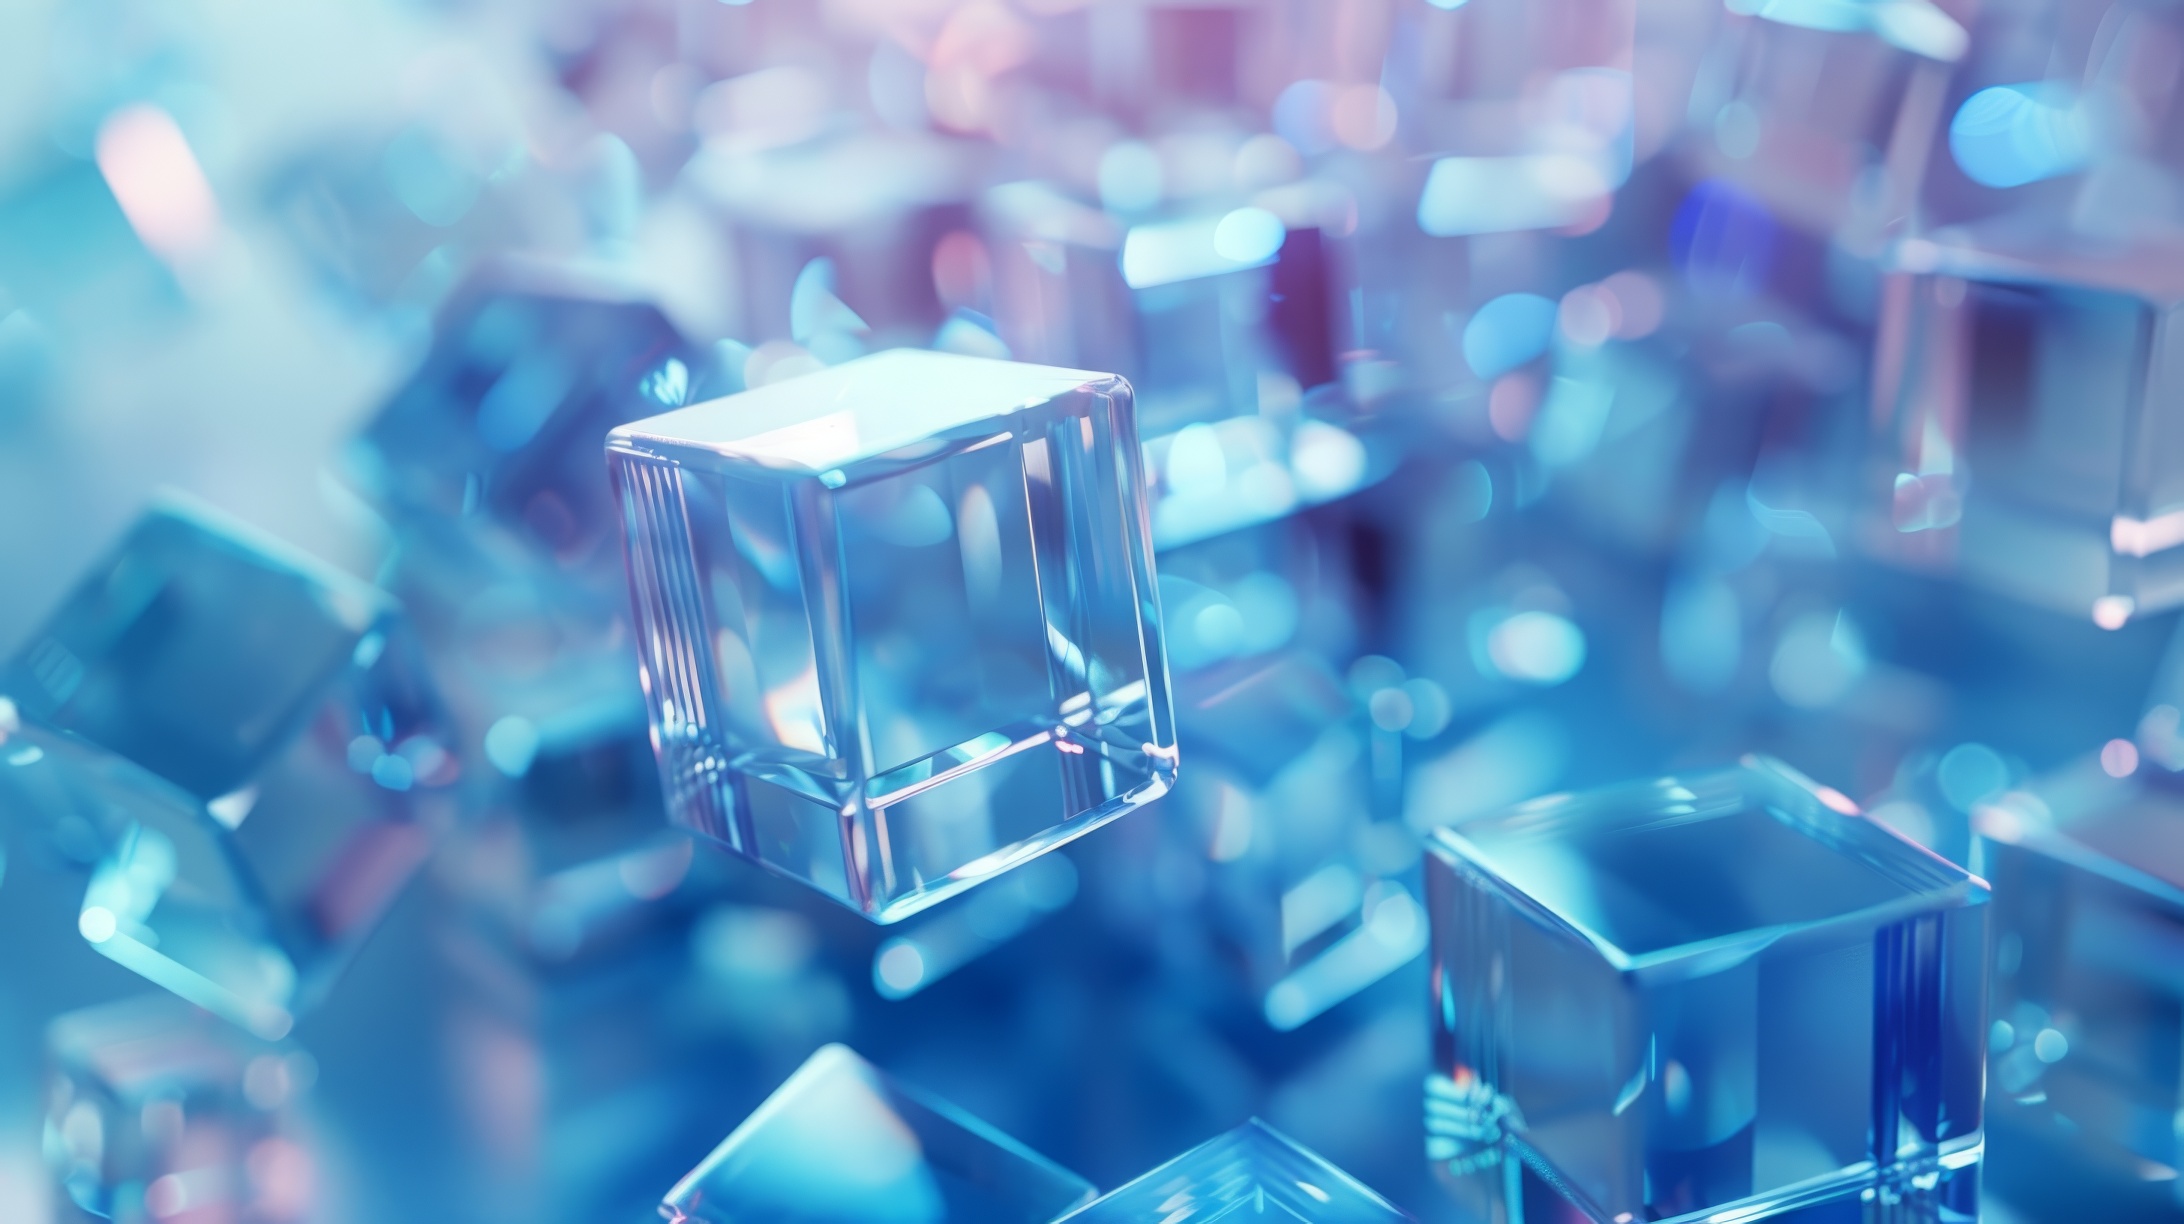 Abstract background of glass cubes and blue background